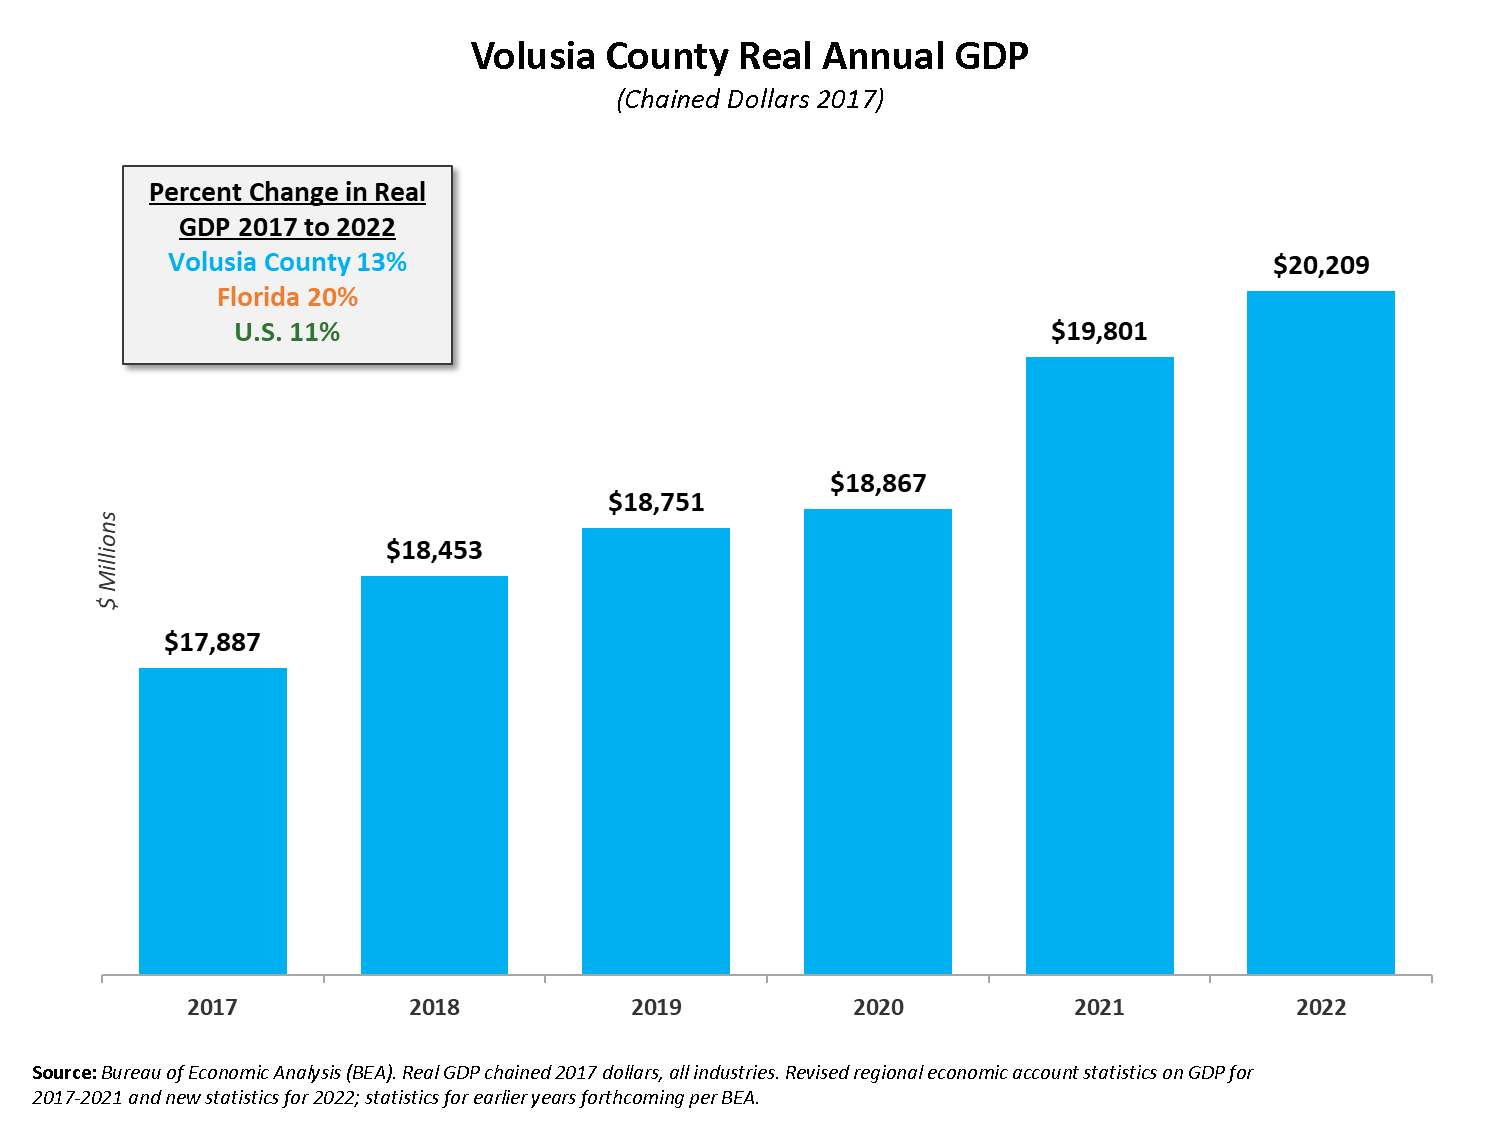 The chart is showing the Volusia County Annual GDP from 2012 to 2022. Click the image link for a pdf with details.